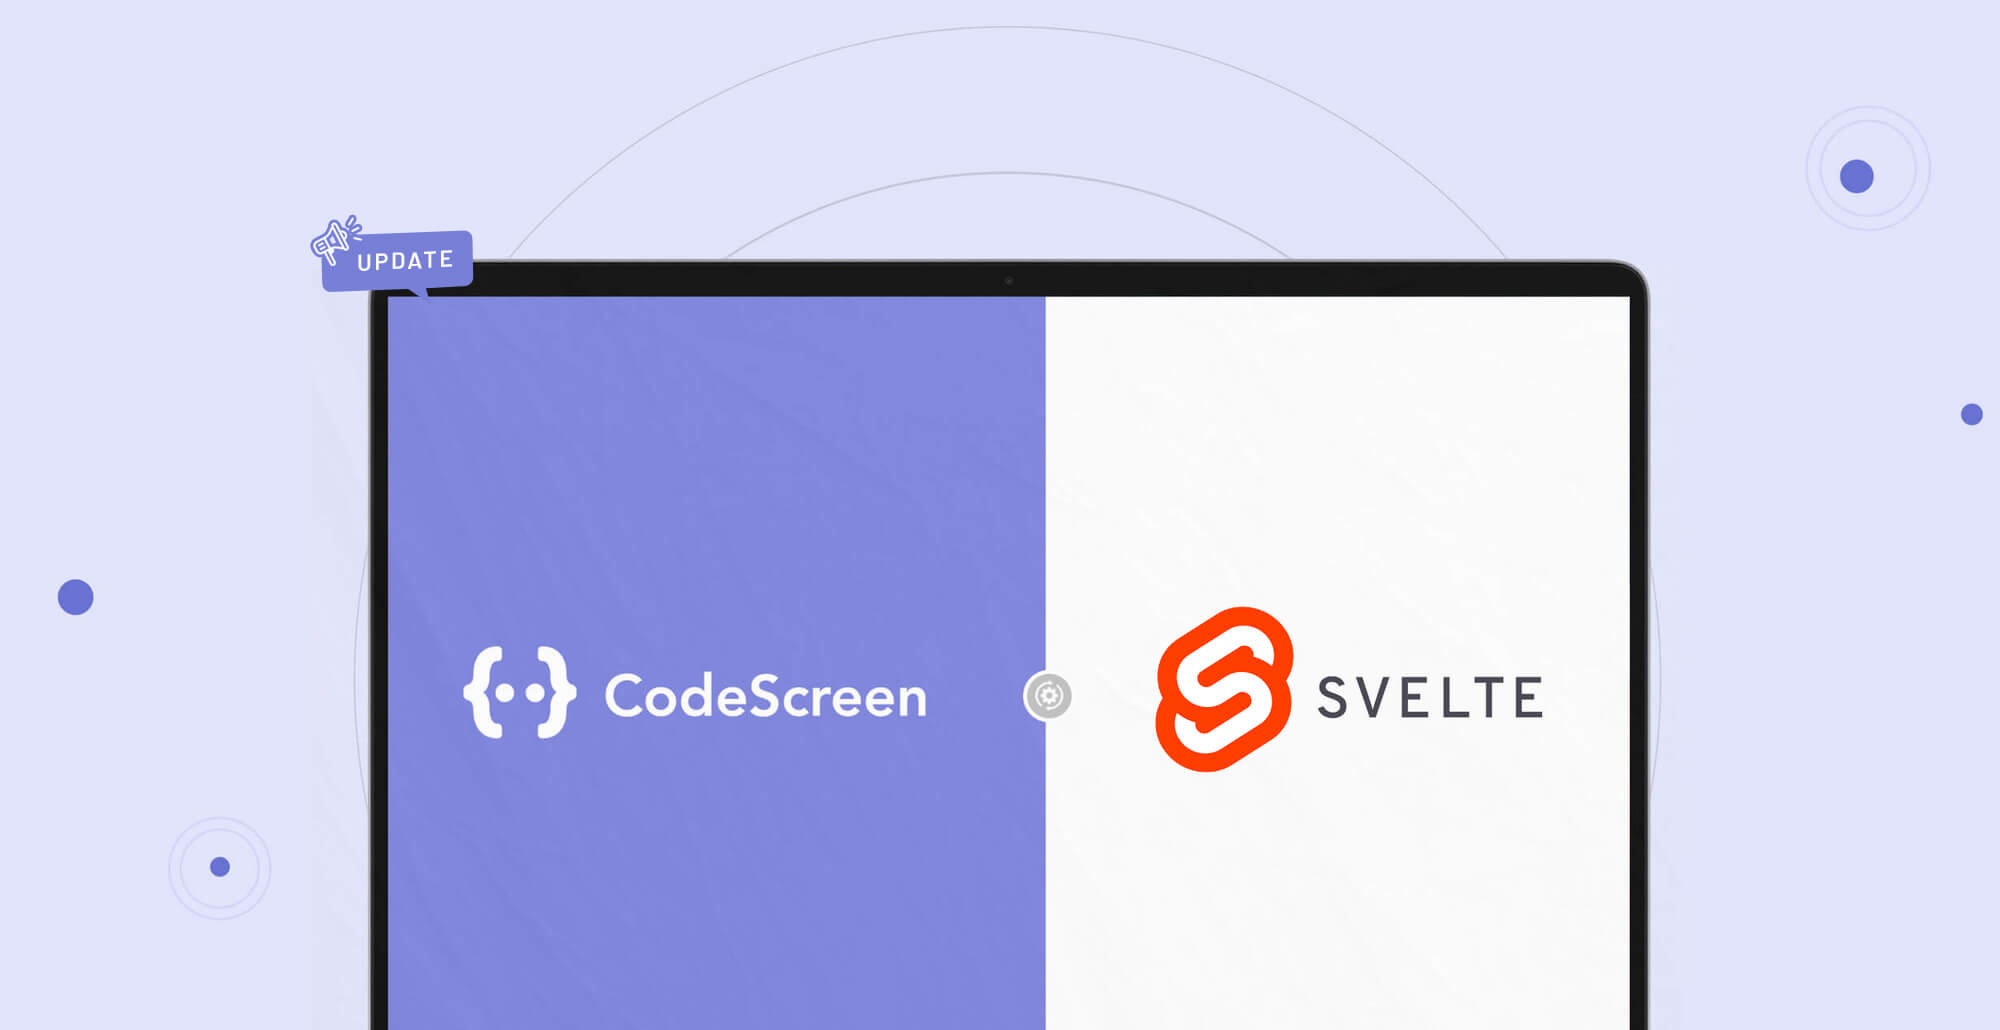 CodeScreen now provides custom Svelte assessments to screen for the best Svelte developers